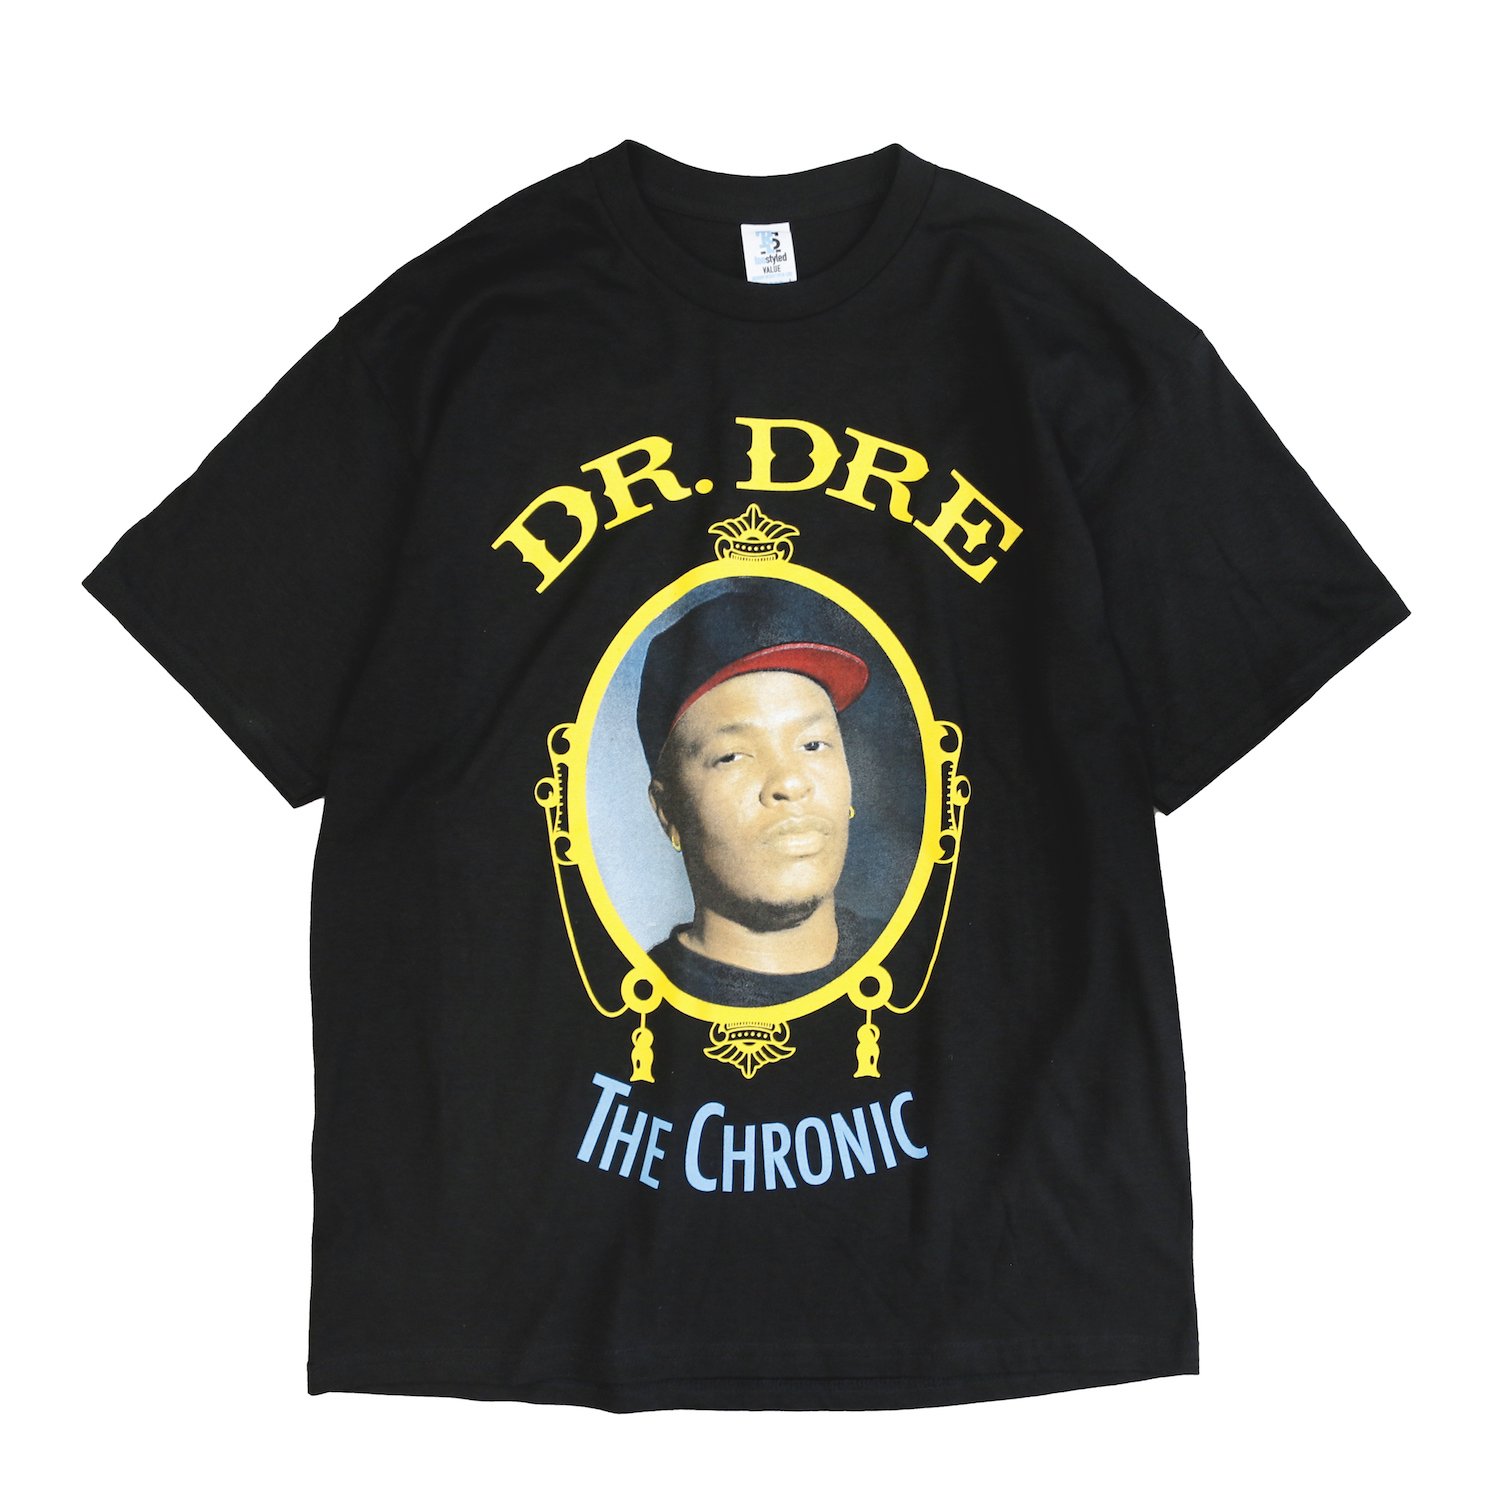 <img class='new_mark_img1' src='https://img.shop-pro.jp/img/new/icons8.gif' style='border:none;display:inline;margin:0px;padding:0px;width:auto;' /> Music Tee / S/S DR.DRE 